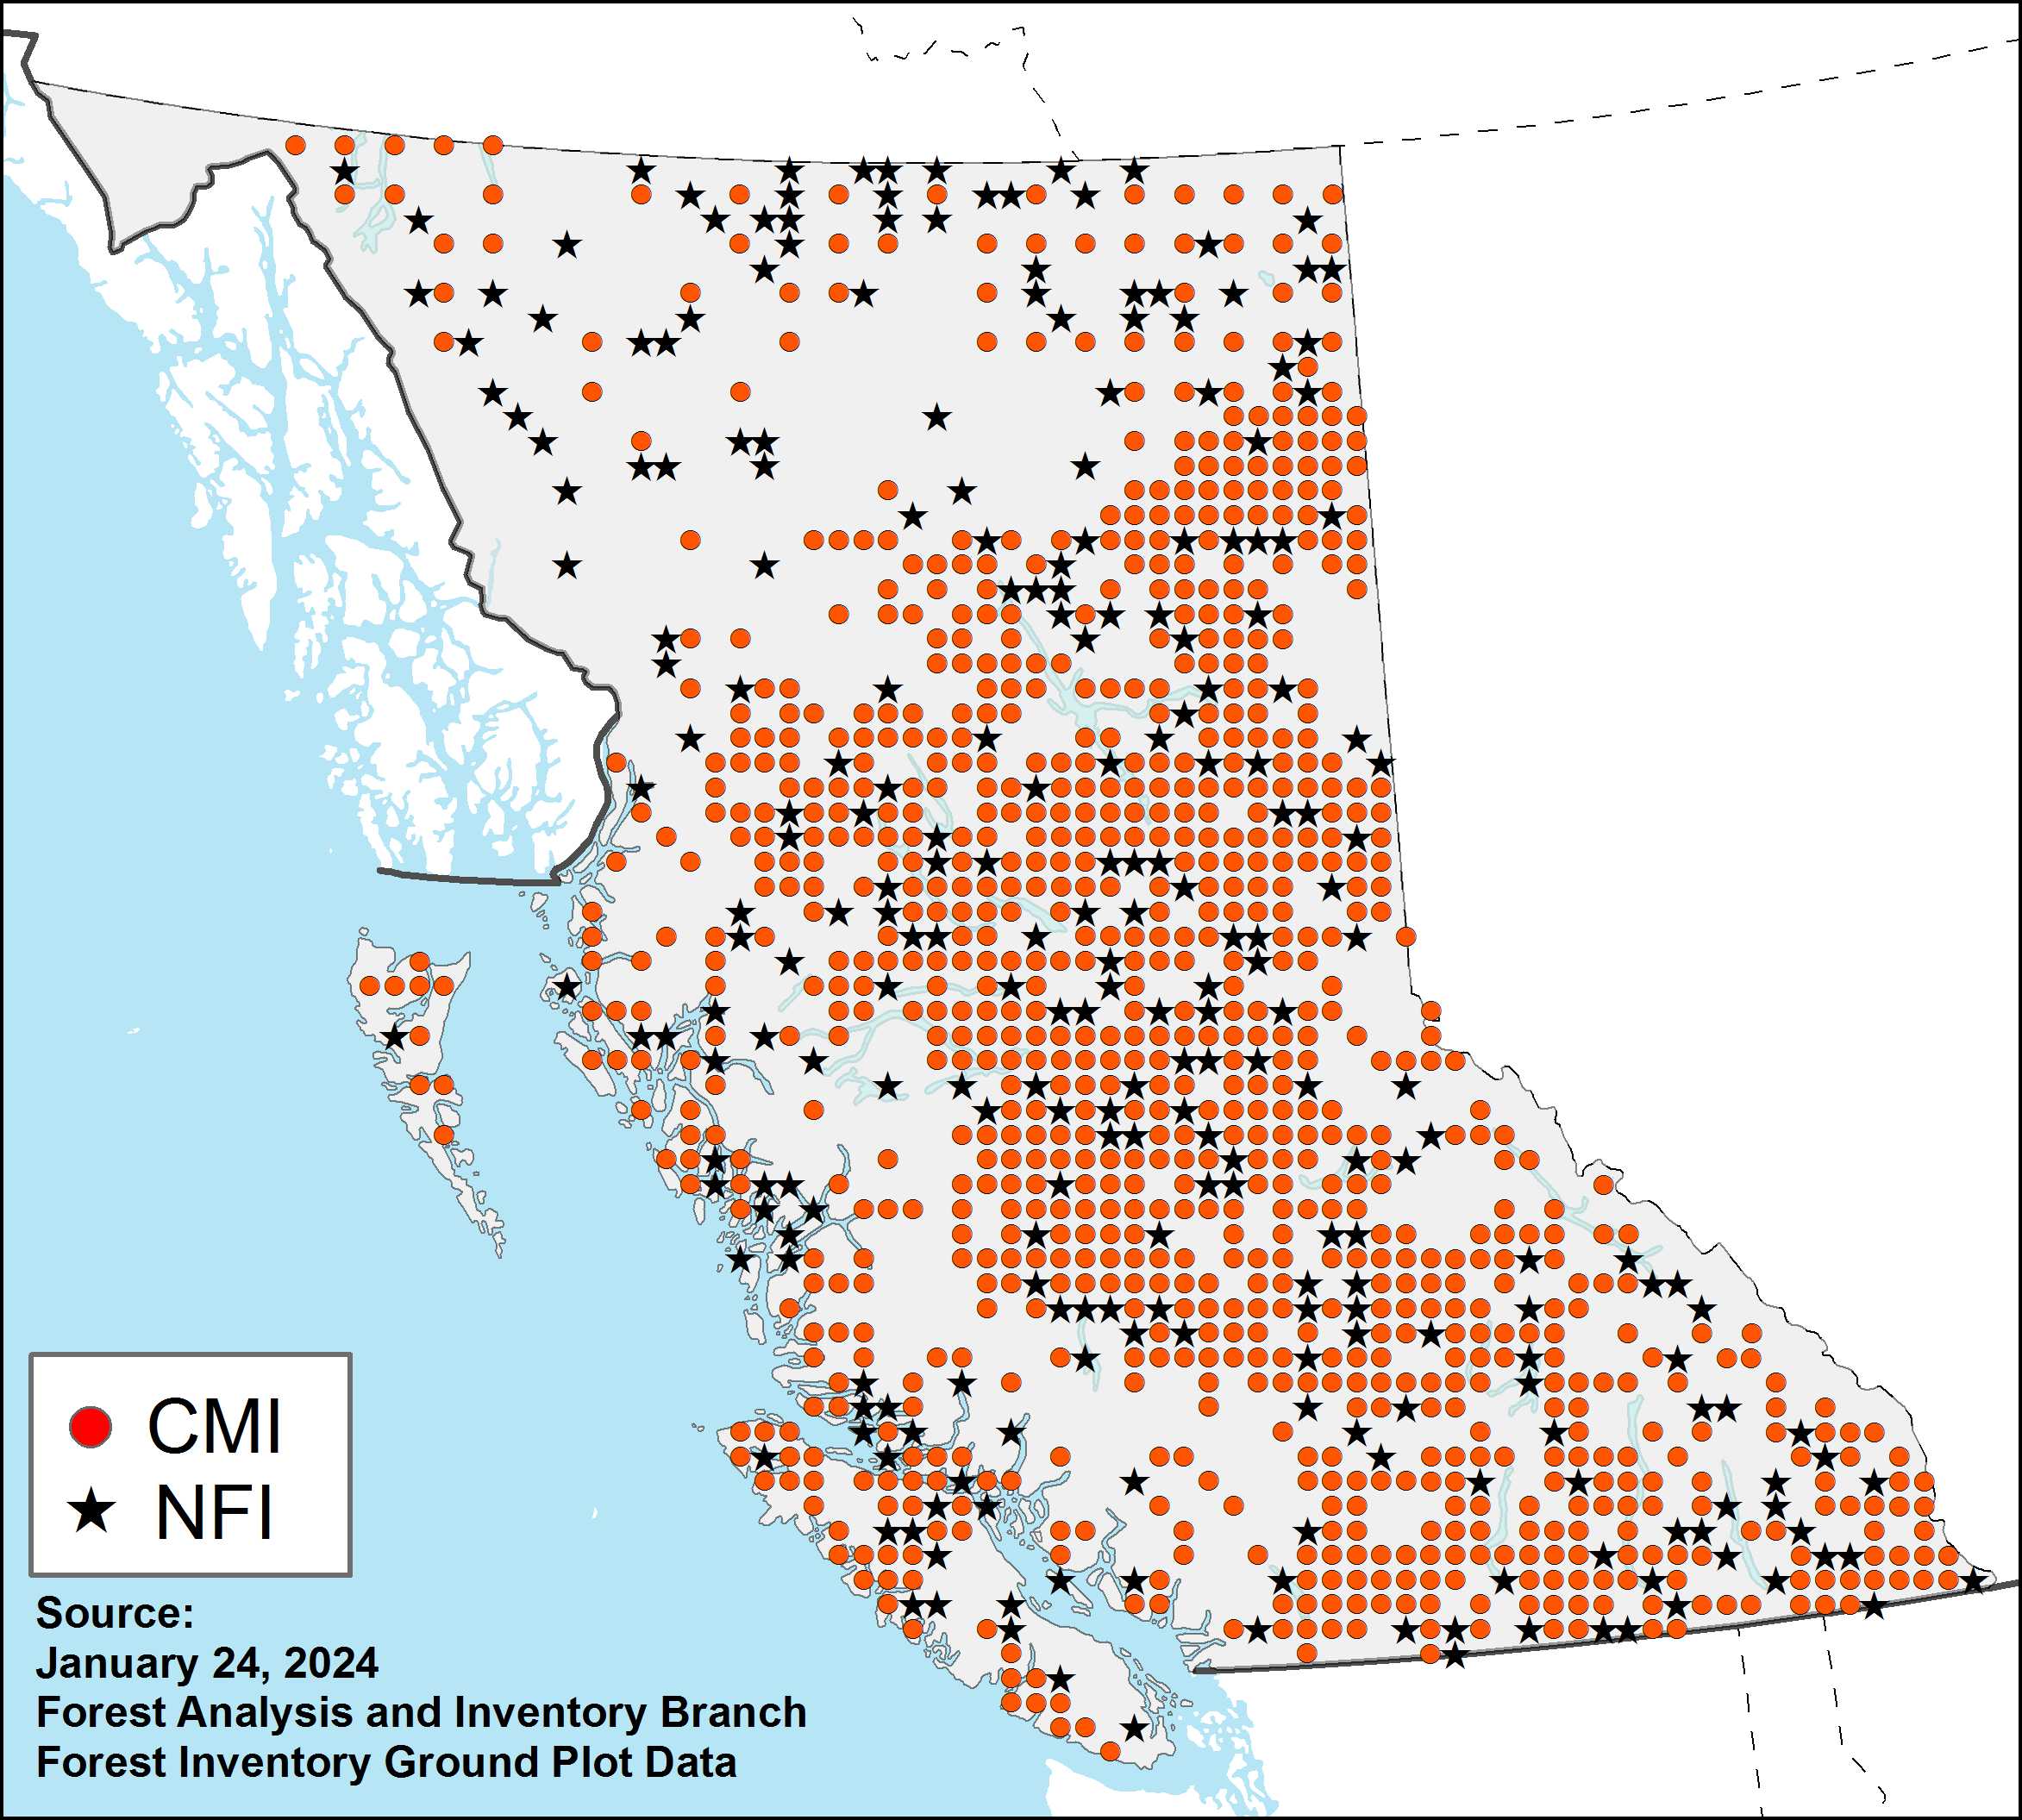 Map of British Columbia that indicates the locations of established Change Monitoring Inventory plots as well as National Forest Inventory plots.